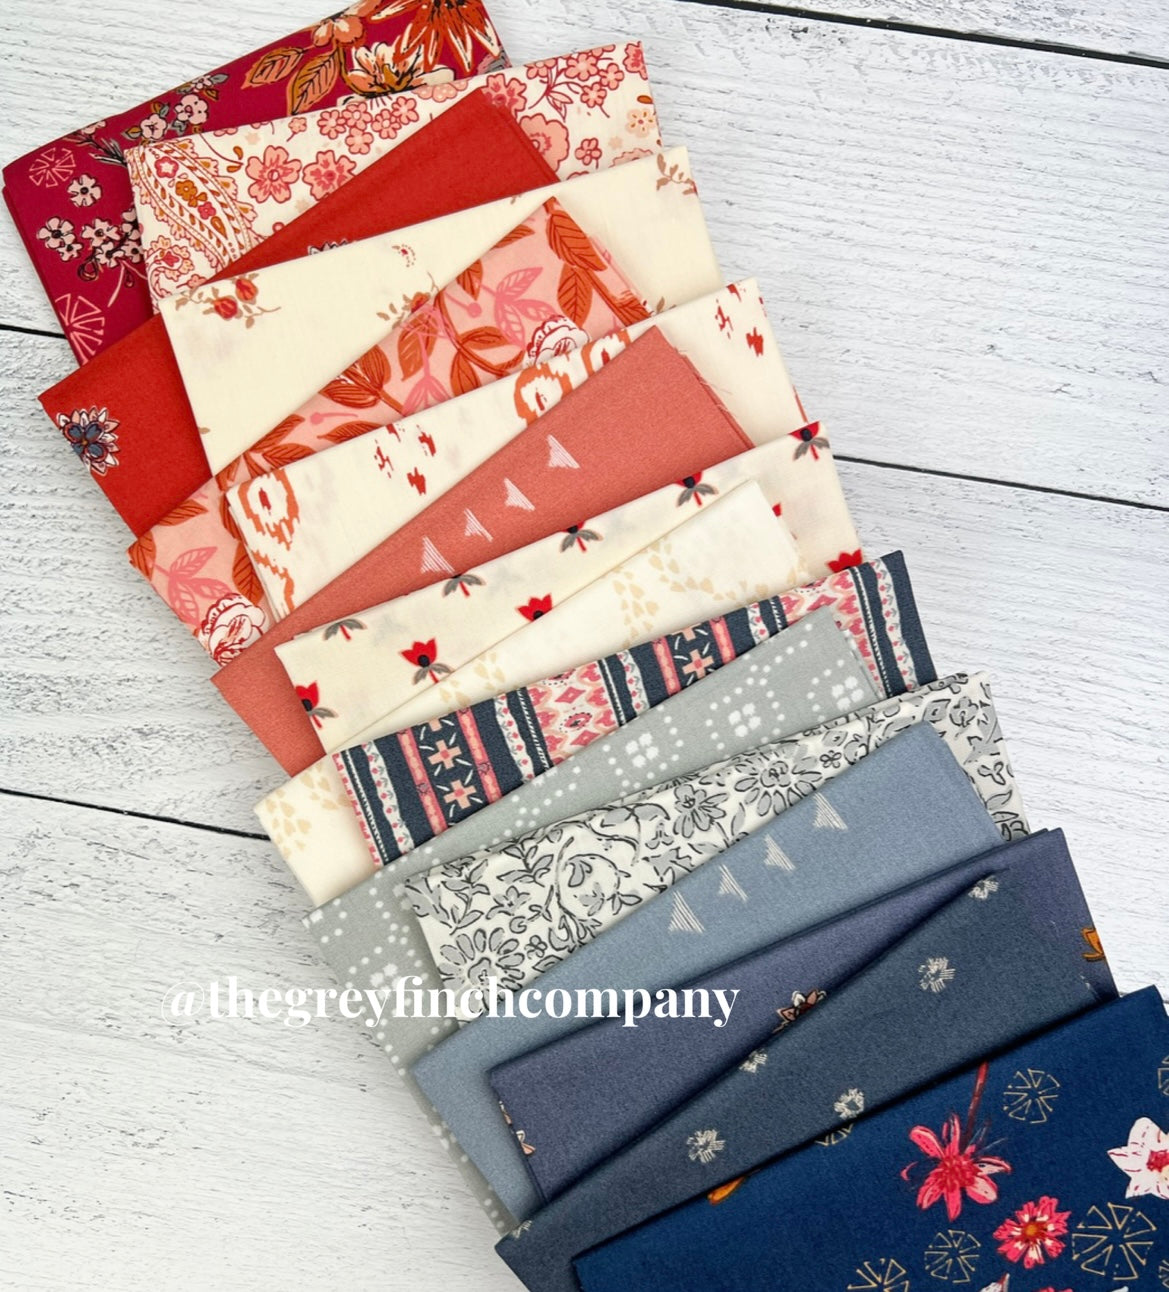 Kindred Collection Bundle by Sharon Holland - 16 fabrics - Art Gallery Fabrics